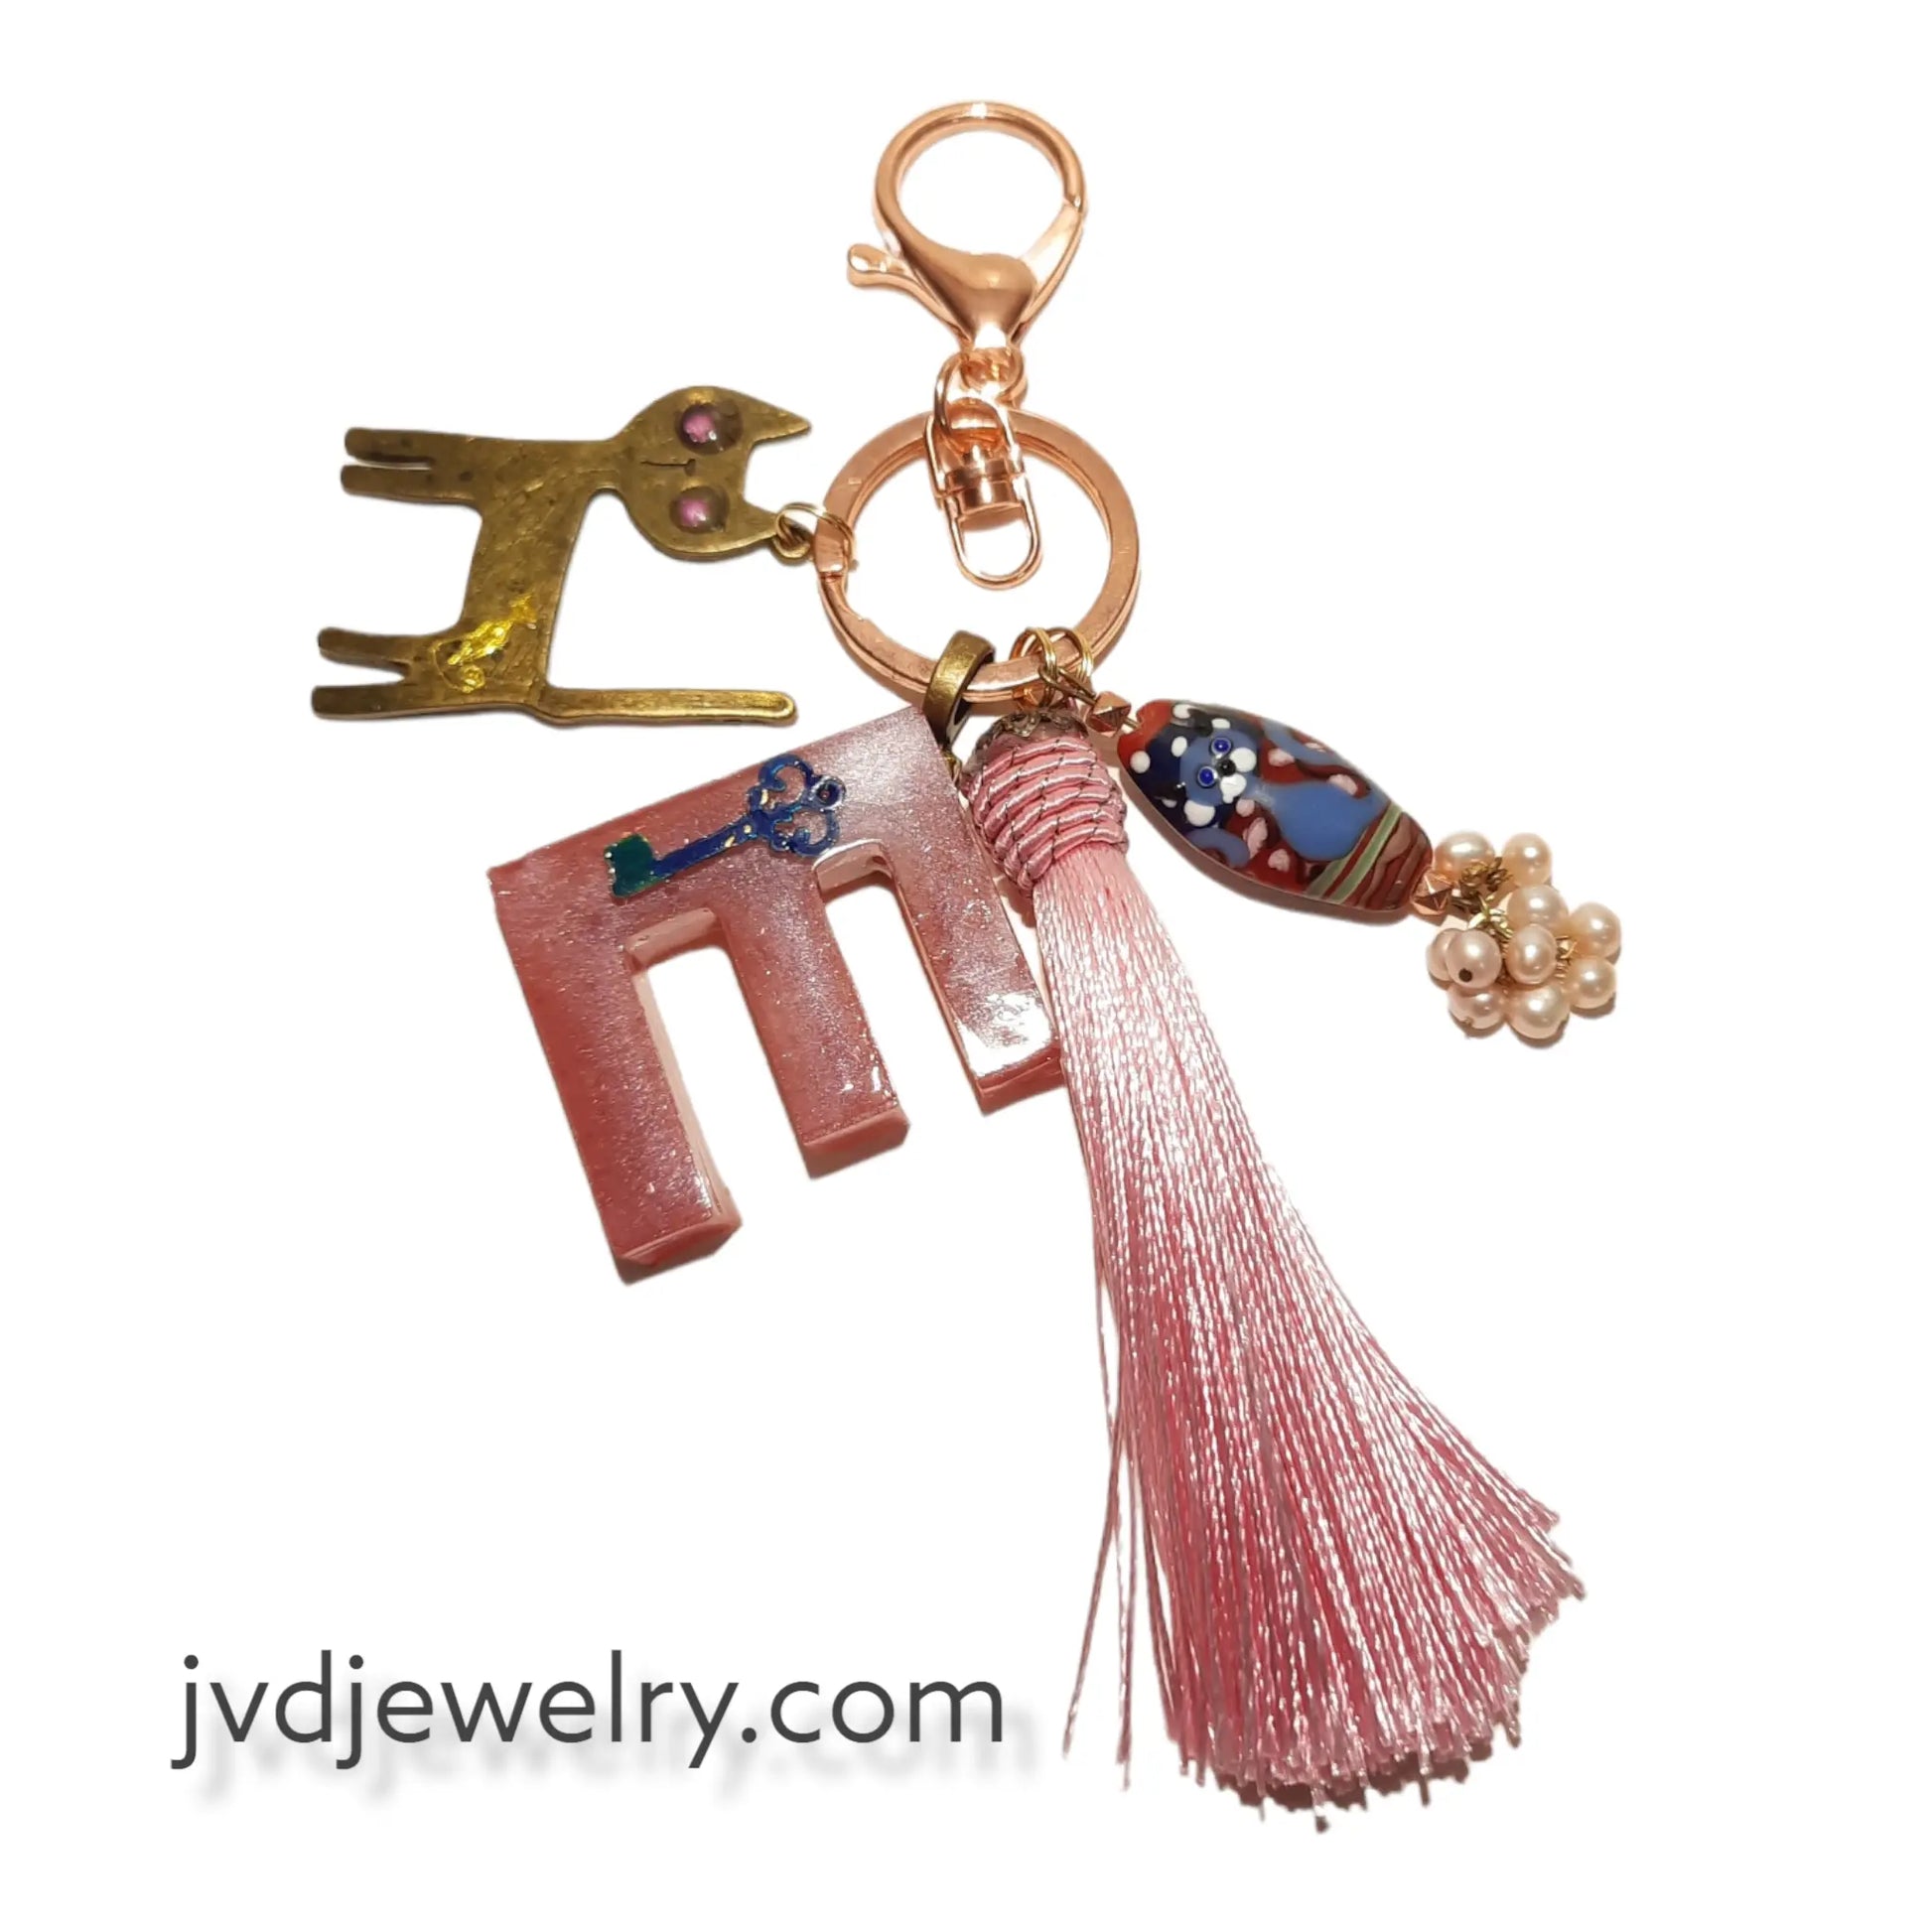 Letter initial resin dried flowers key chain accessories - Image #6